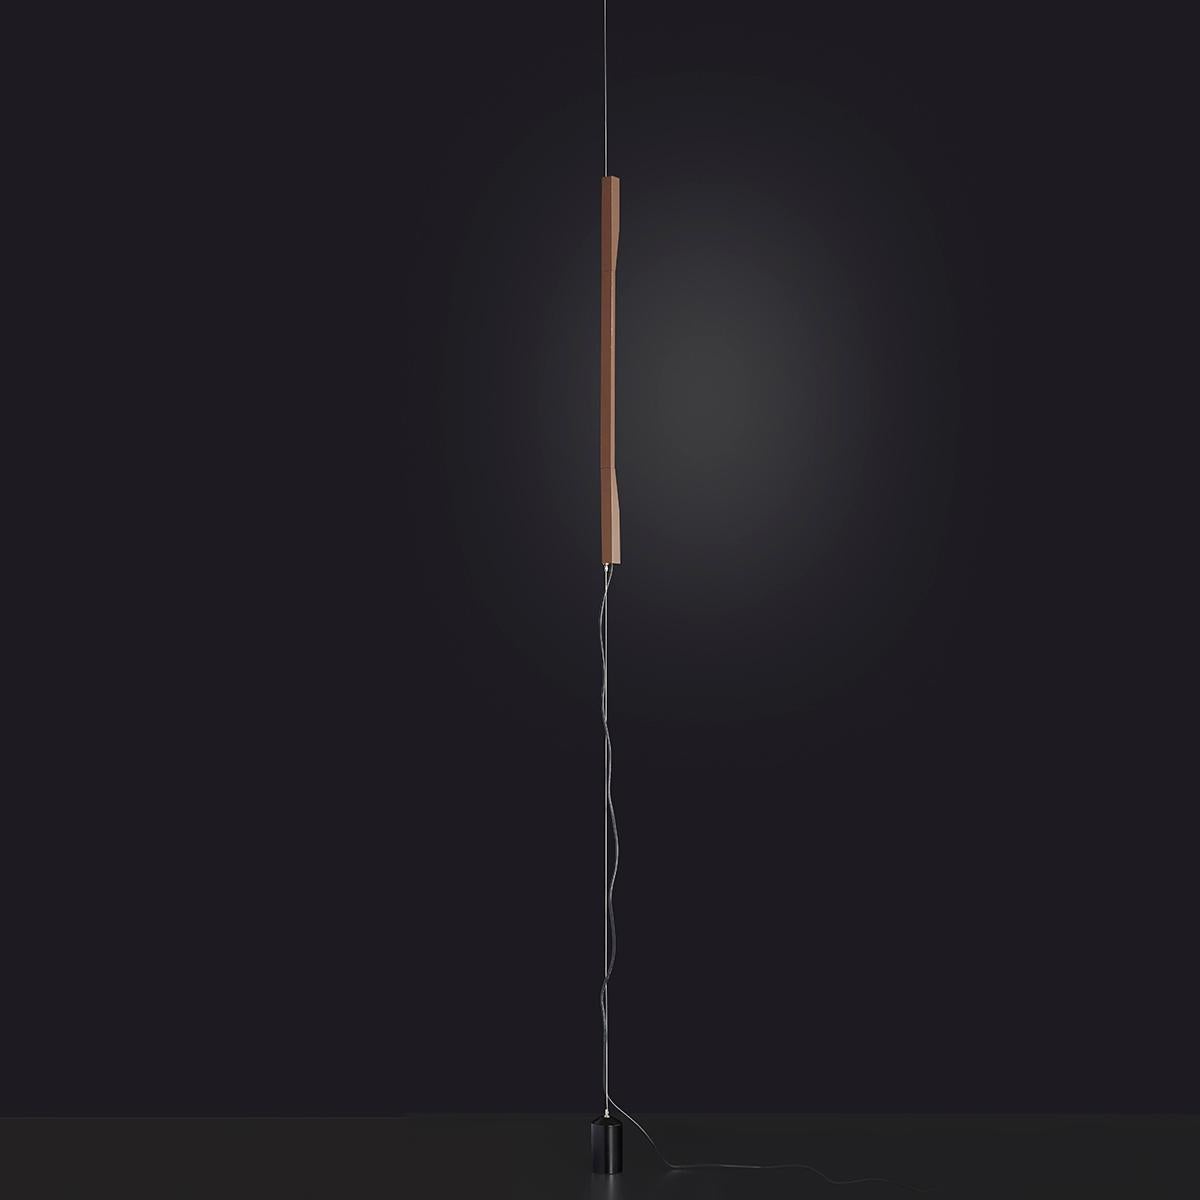 Suspension lamp 'Ilo' designed by David Lopez Quincoce in 2019.
Adjustable led lamp giving indirect light. Vertical sliding of the satin bronze anodized aluminium rod on a ceiling-to-floor steel cable. Matt black painted counterweight. Manufactured